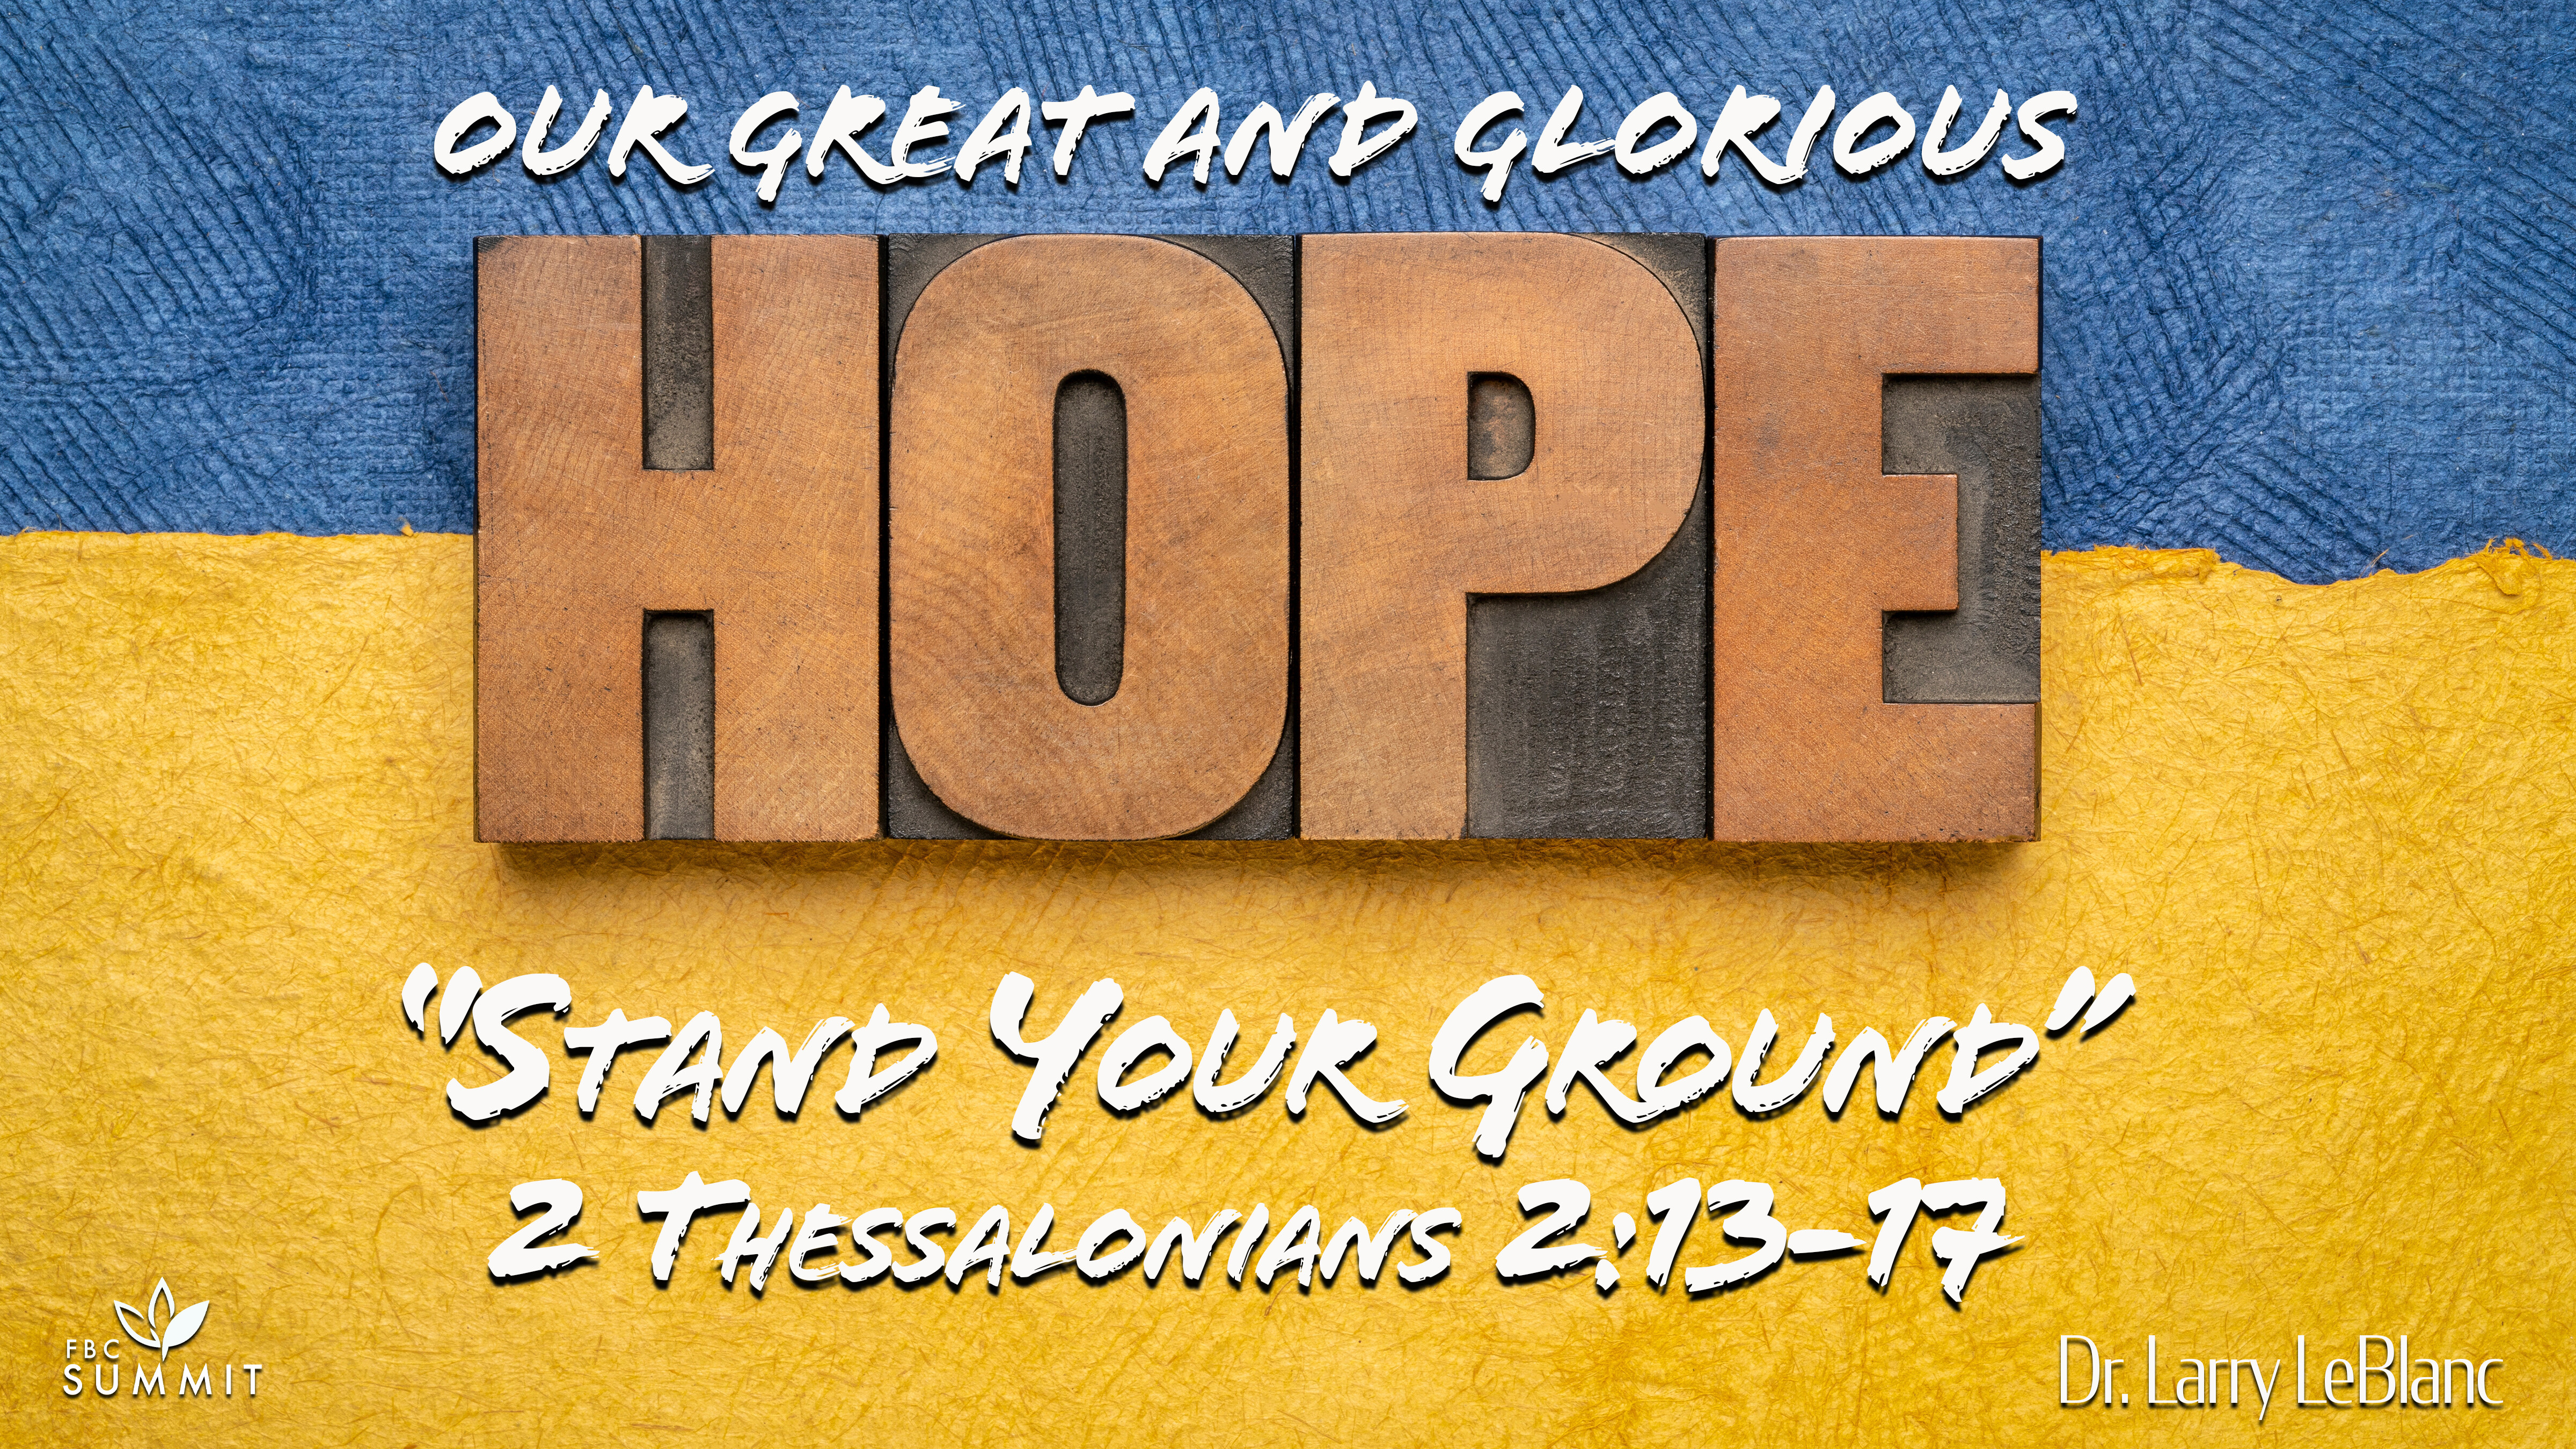 "Stand Your Ground" 2 Thessalonians 2:13-17 // Dr. Larry LeBlanc